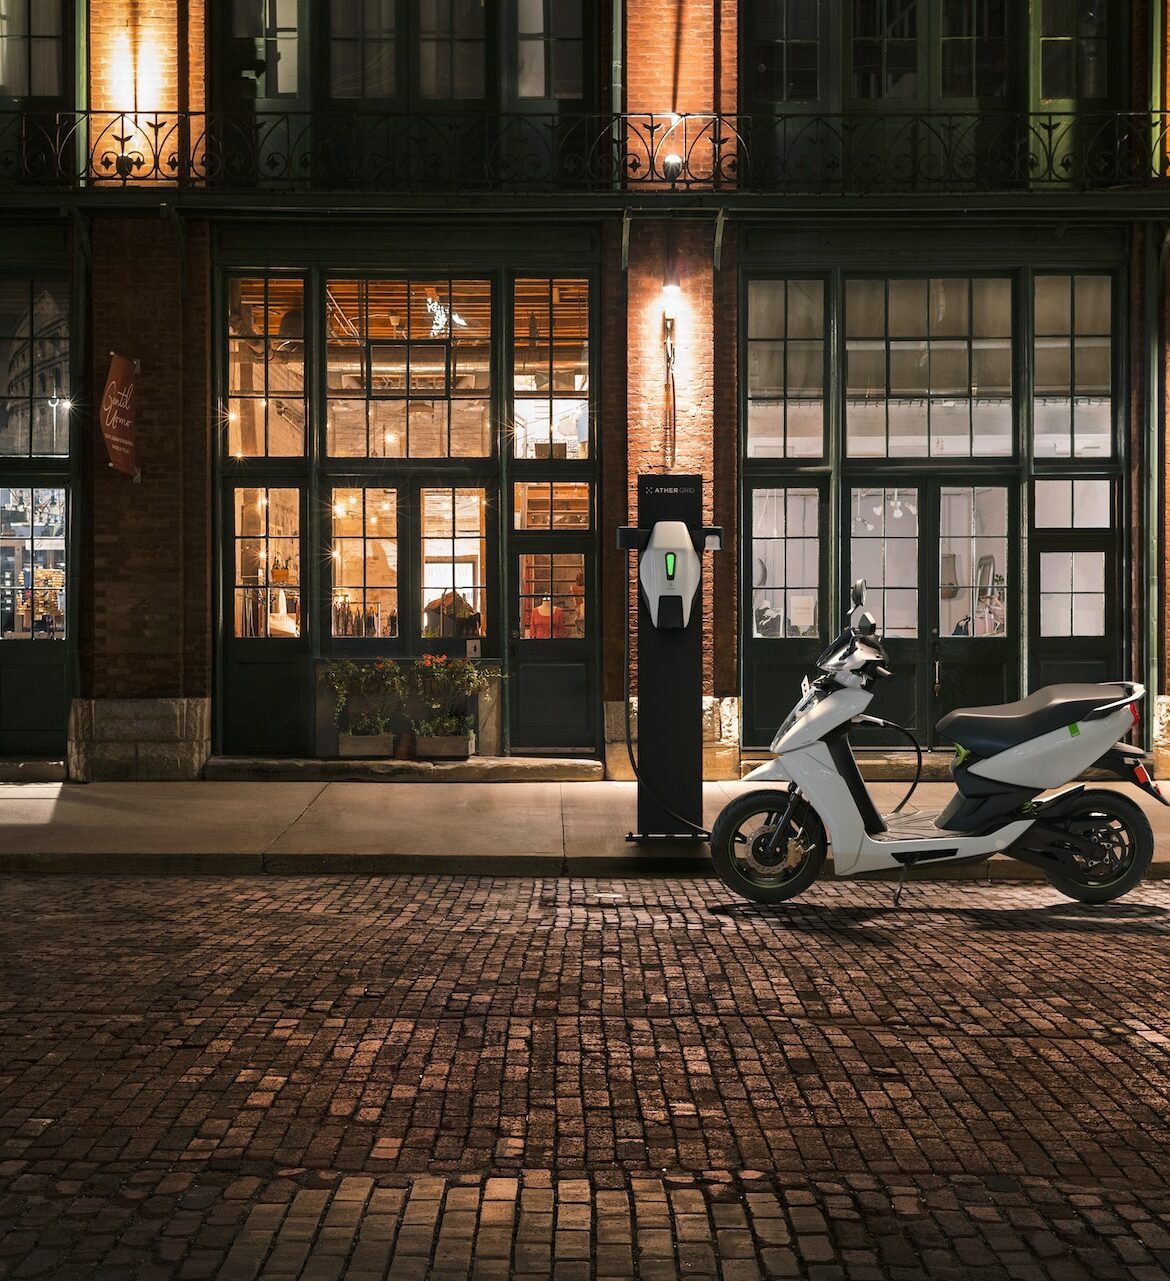 An electric scooter charges at the curb in front of a warmly lit storefront at night